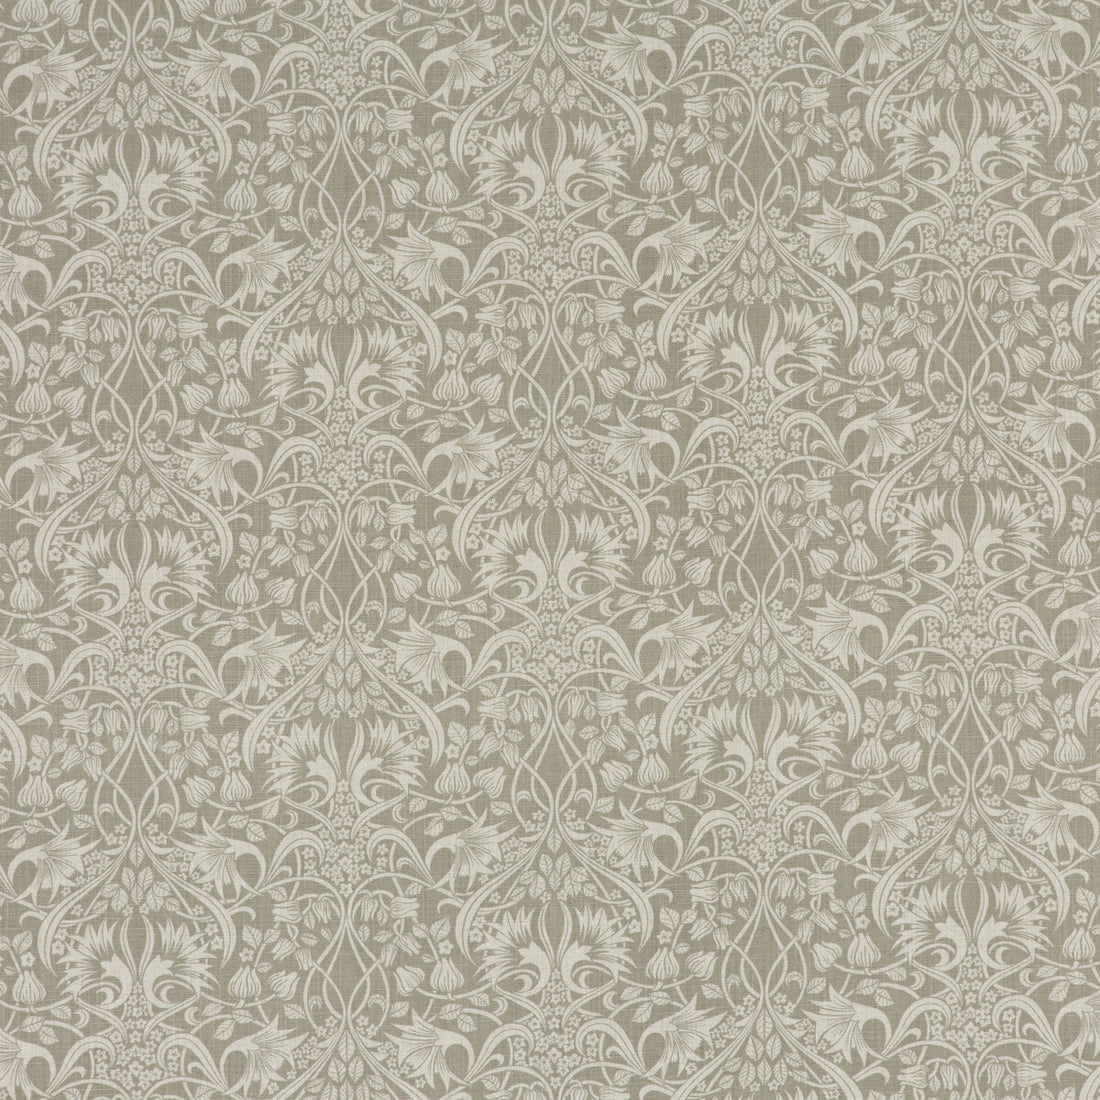 Fritillerie fabric in warm grey color - pattern BP10620.5.0 - by G P &amp; J Baker in the Originals V collection